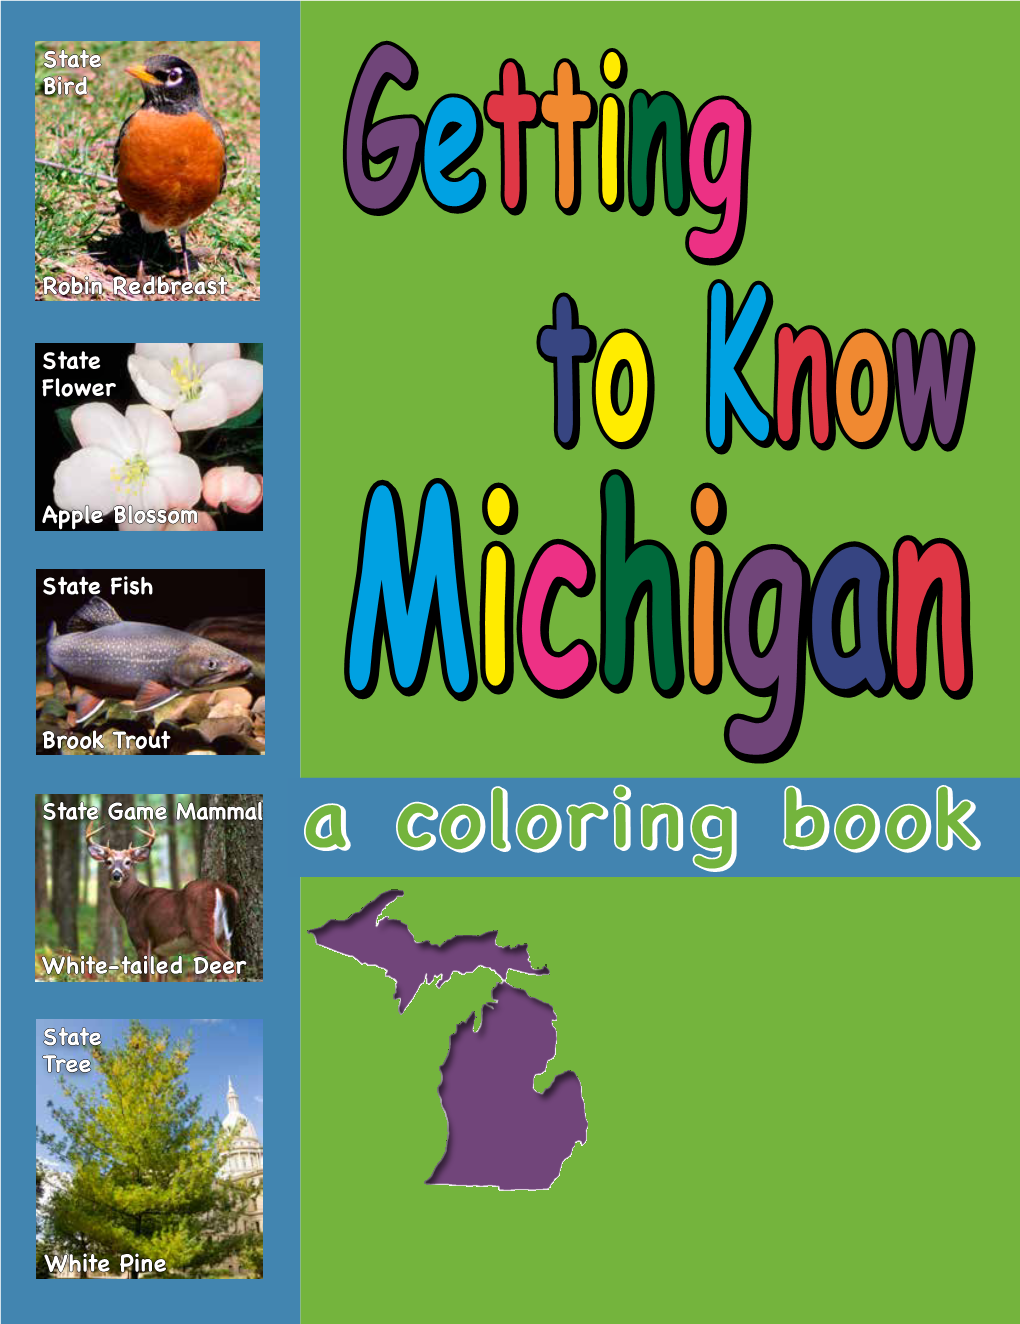 Getting to Know Michigan, Has Been Put Together—To Help You Appreciate the Beautiful and Bountiful State You Live In